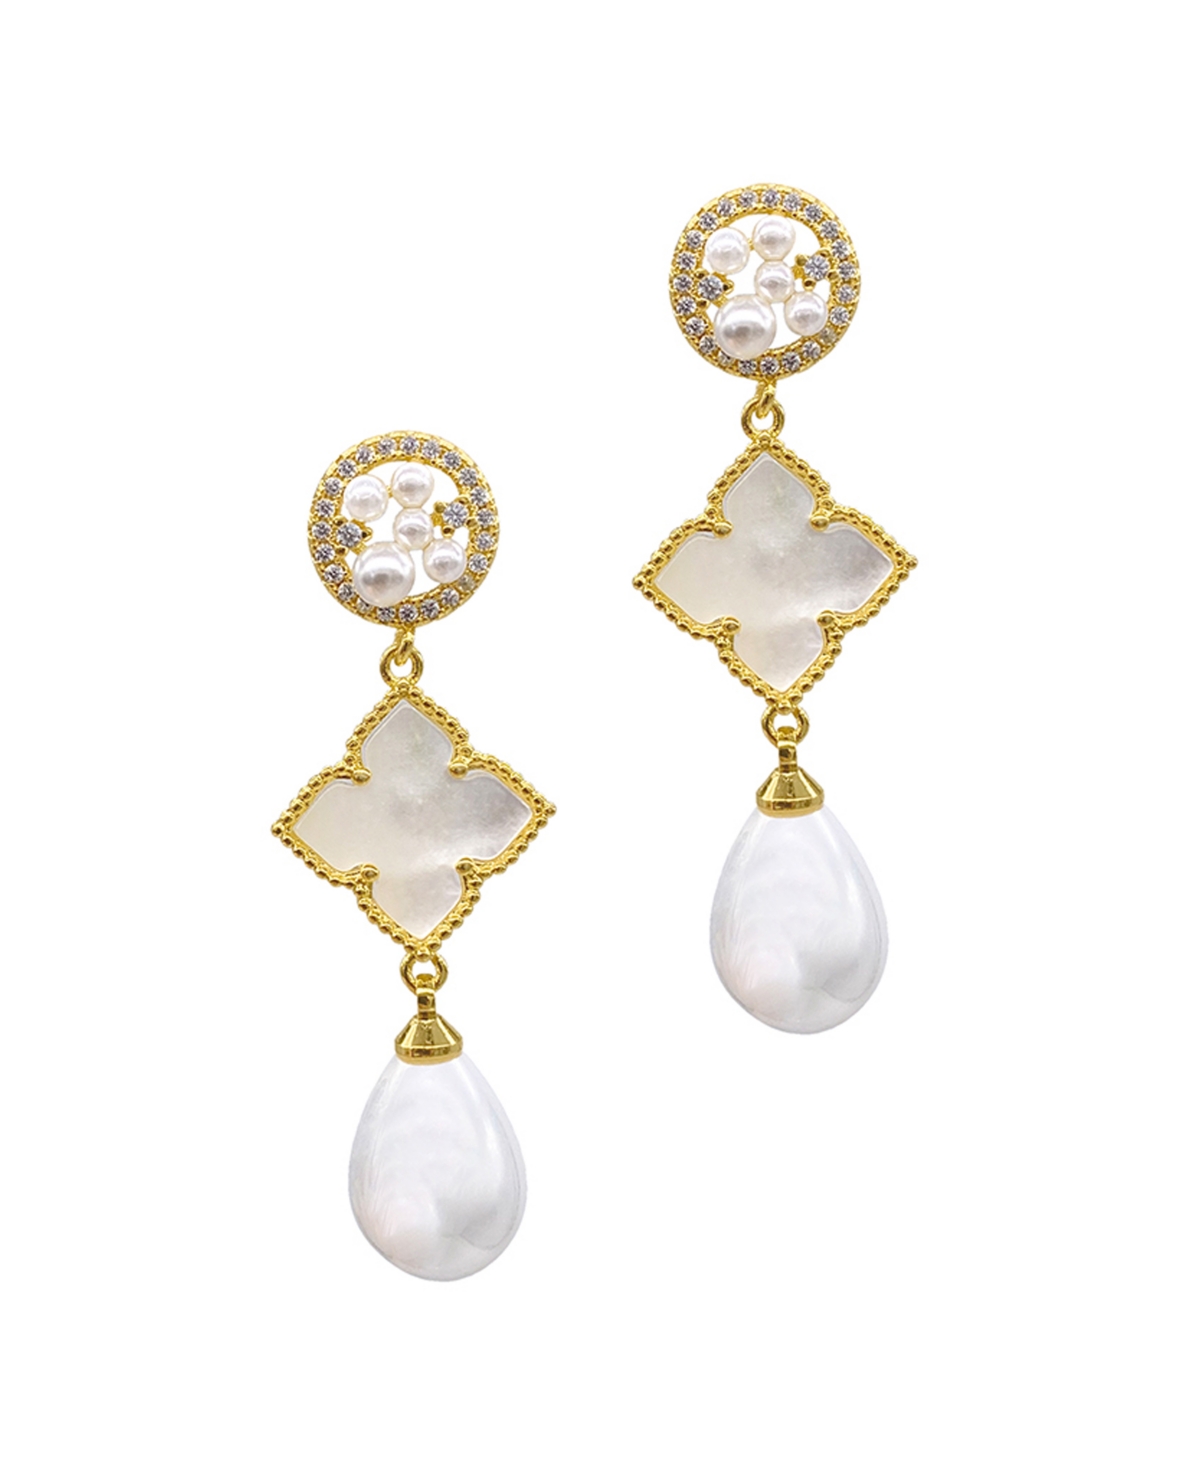 14K Gold-Tone Plated Mother of Pearl Flower, Cultivated Freshwater Pearl Drop and Dangle Earrings - White